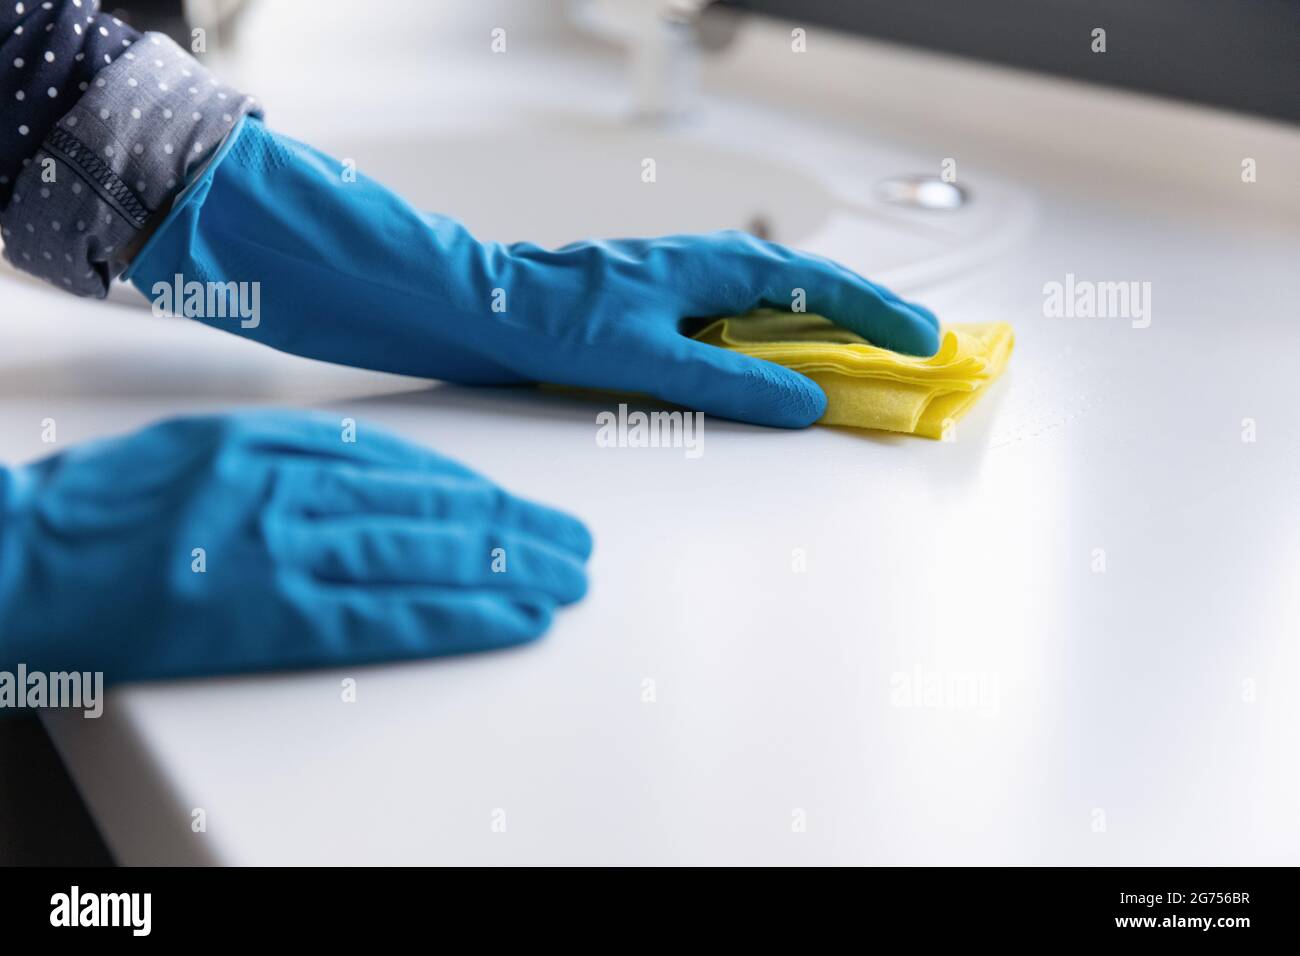 Housewife, cleaner, janitor wearing blue protective rubber gloves Stock Photo